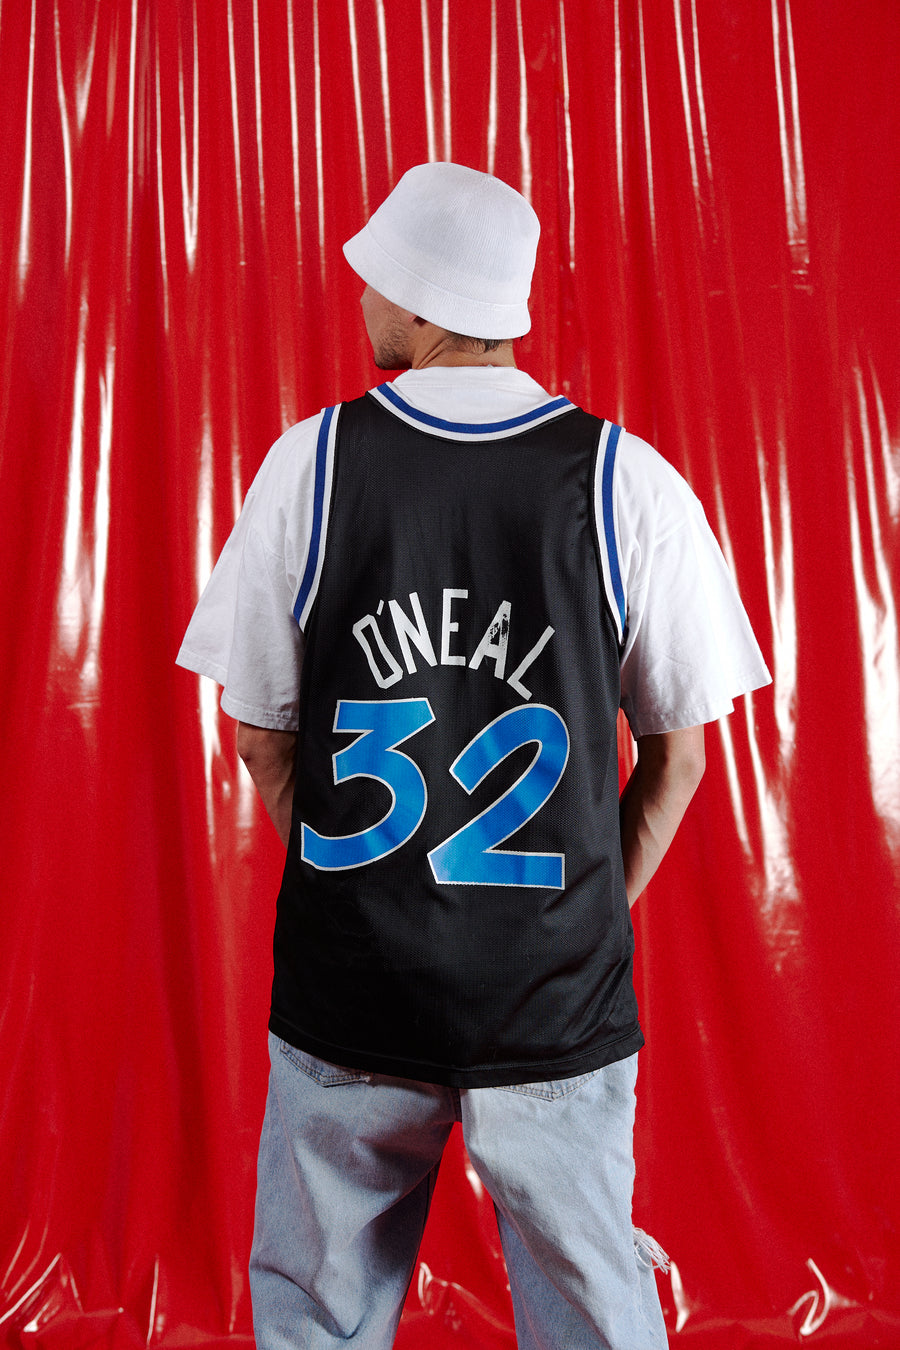 Orlando Magic Shaquille O'Neal Jersey in a vintage style from thrift store Twise Studio